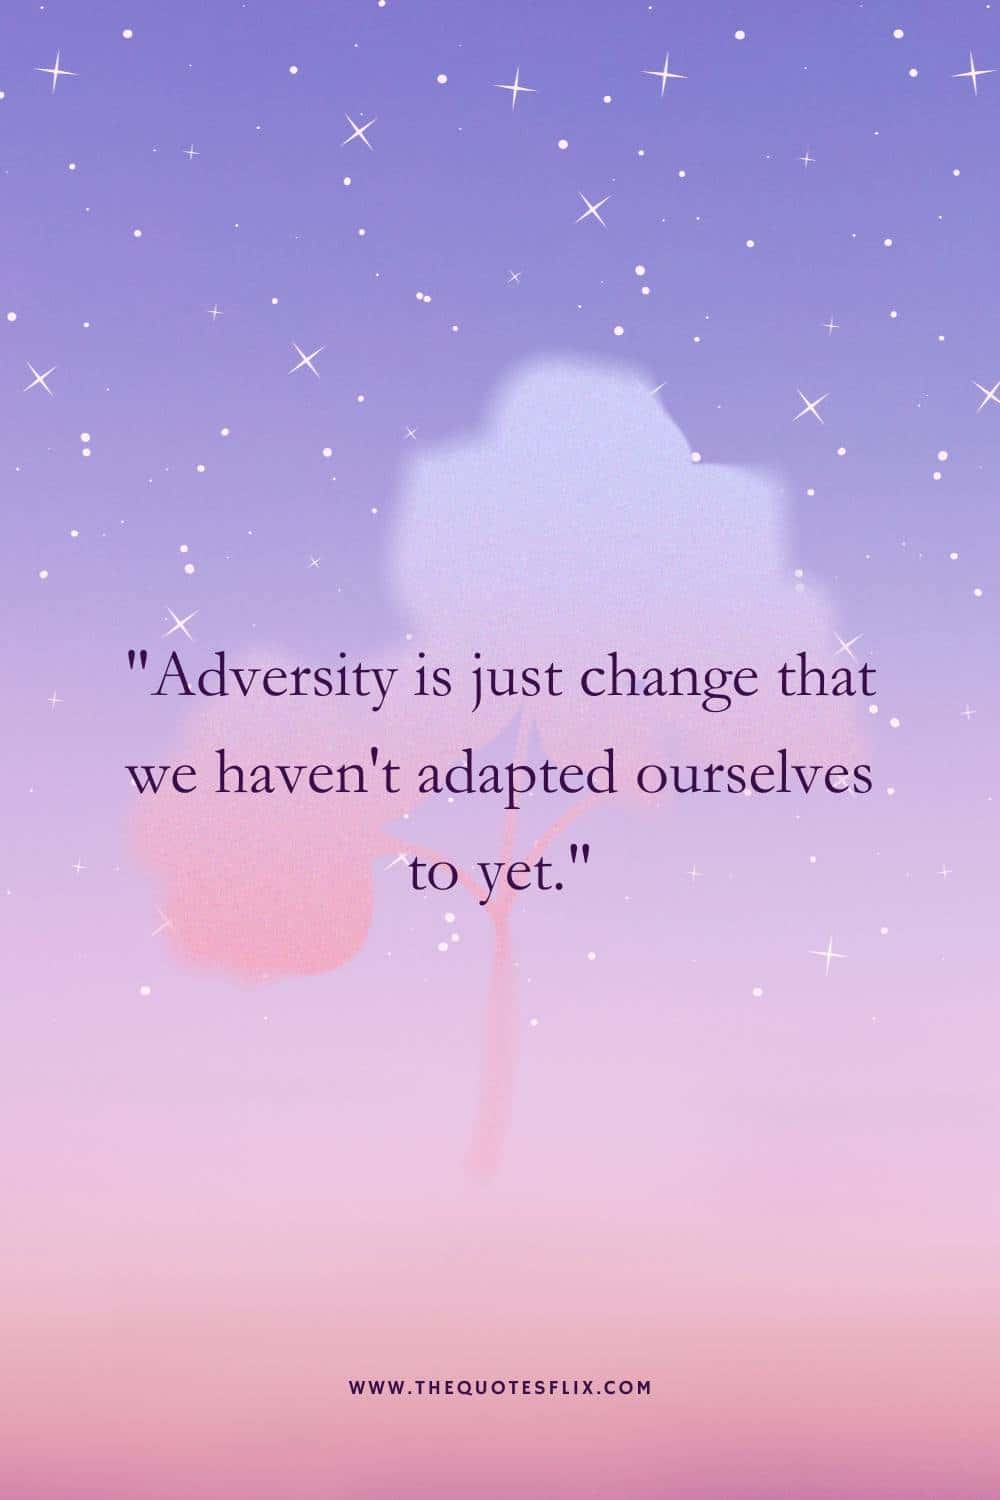 quotes for cancer survivor - adversity is change adapted ourself yet